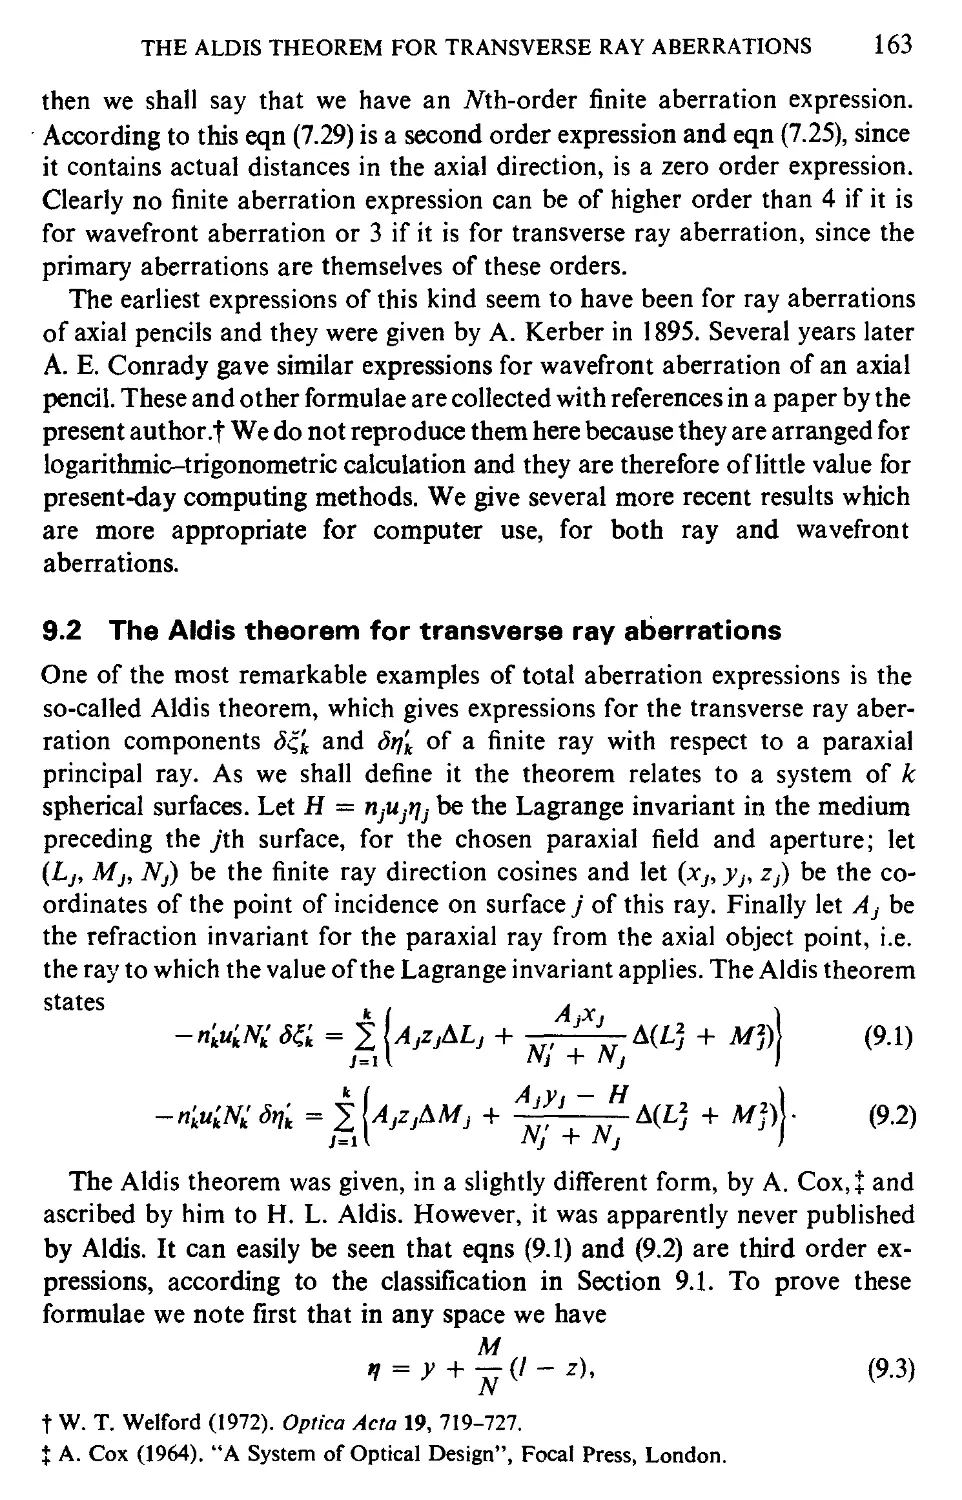 9.2 The Aldis theorem for transverse ray aberrations